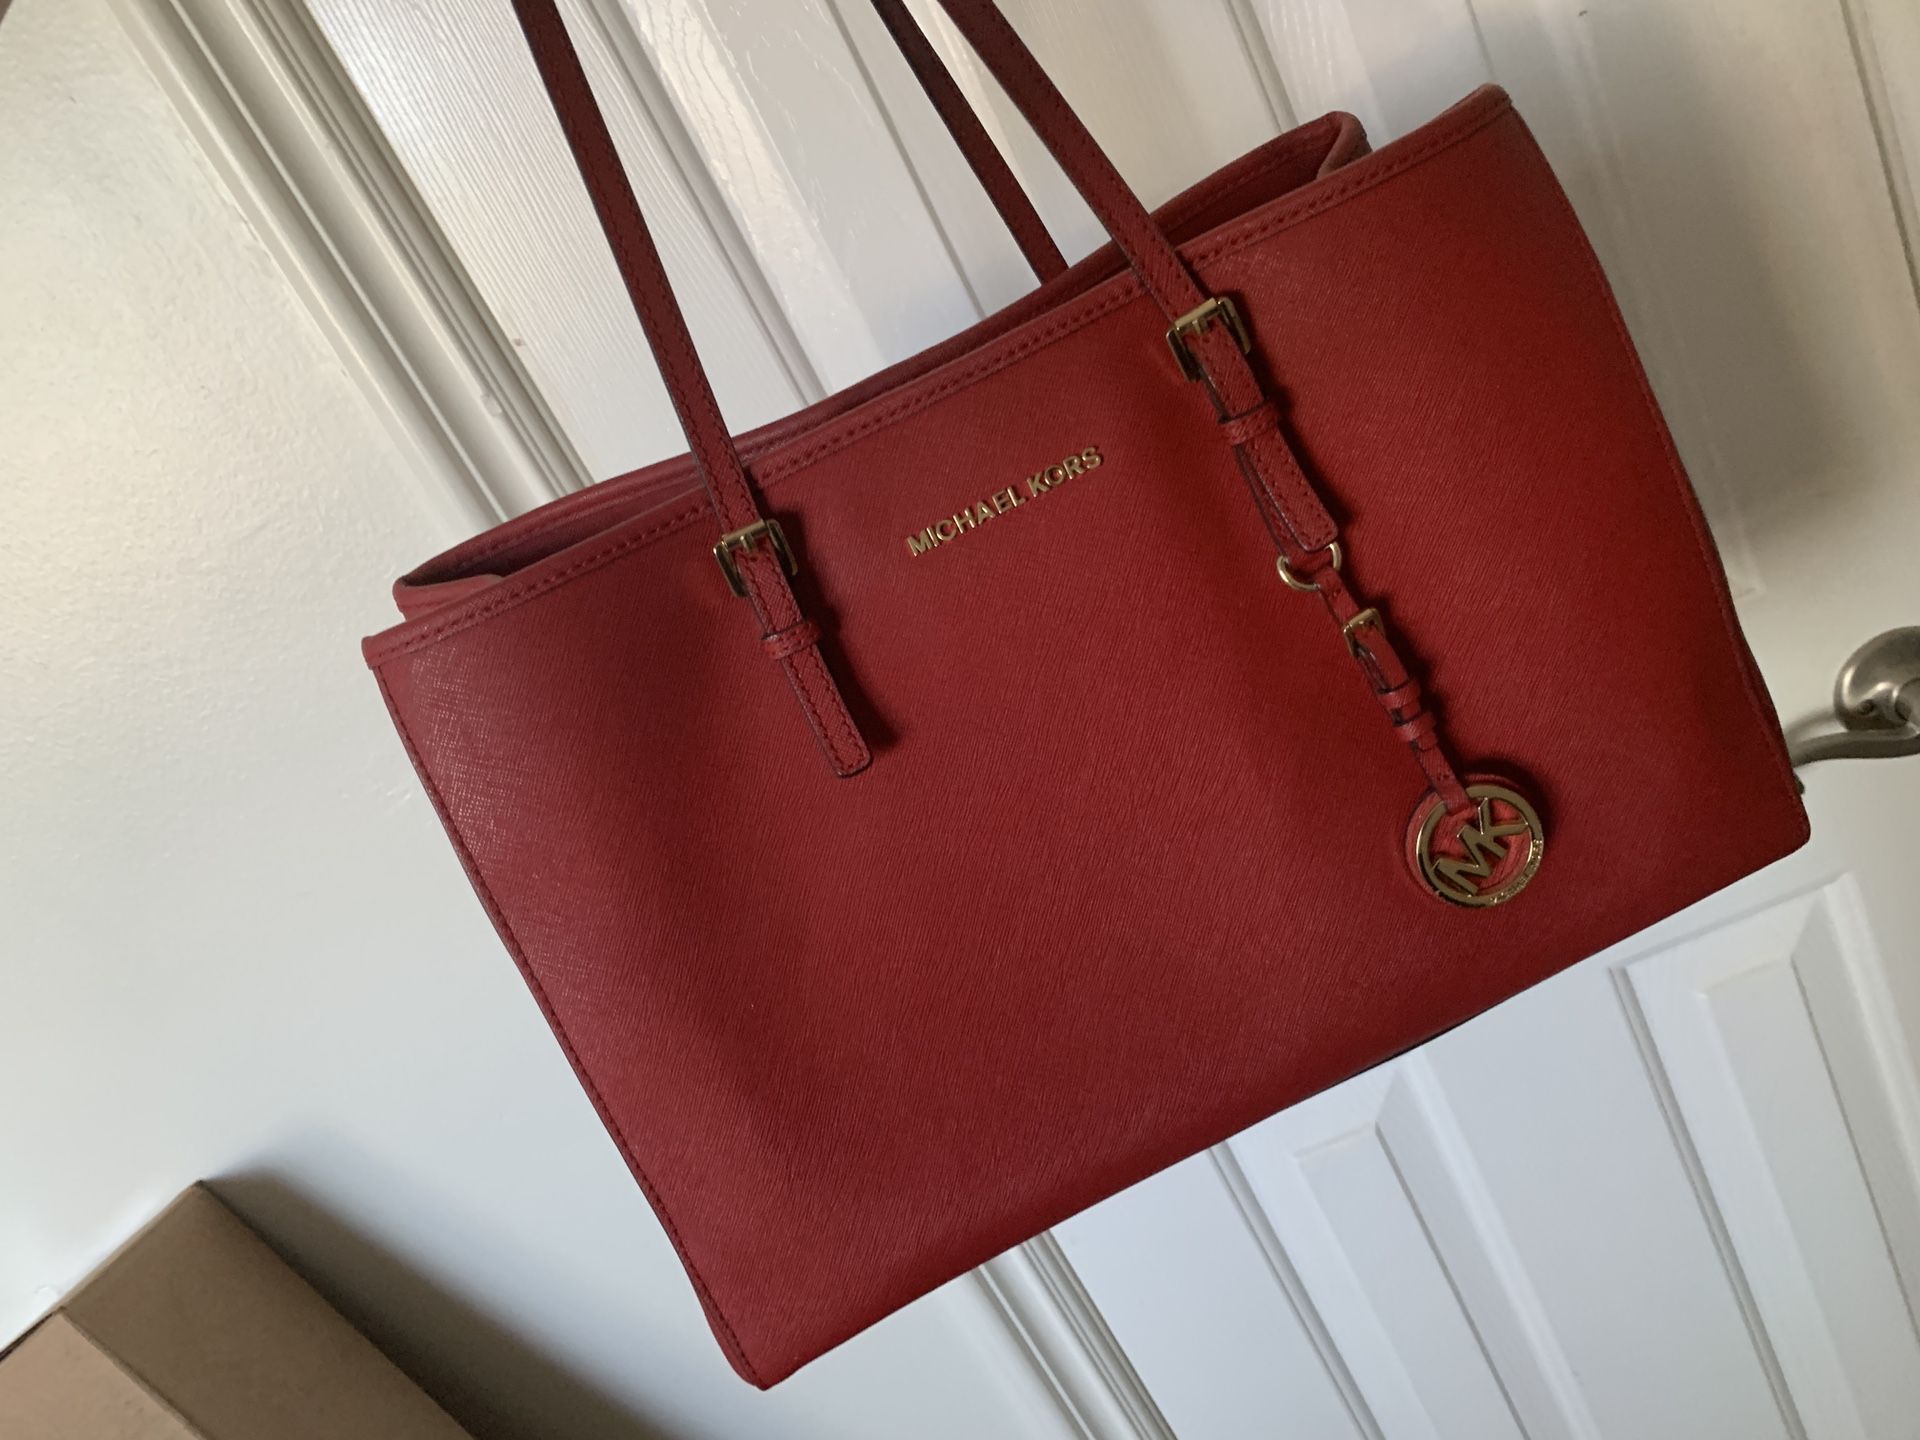 Michael Kors red purse tote bag perfect condition